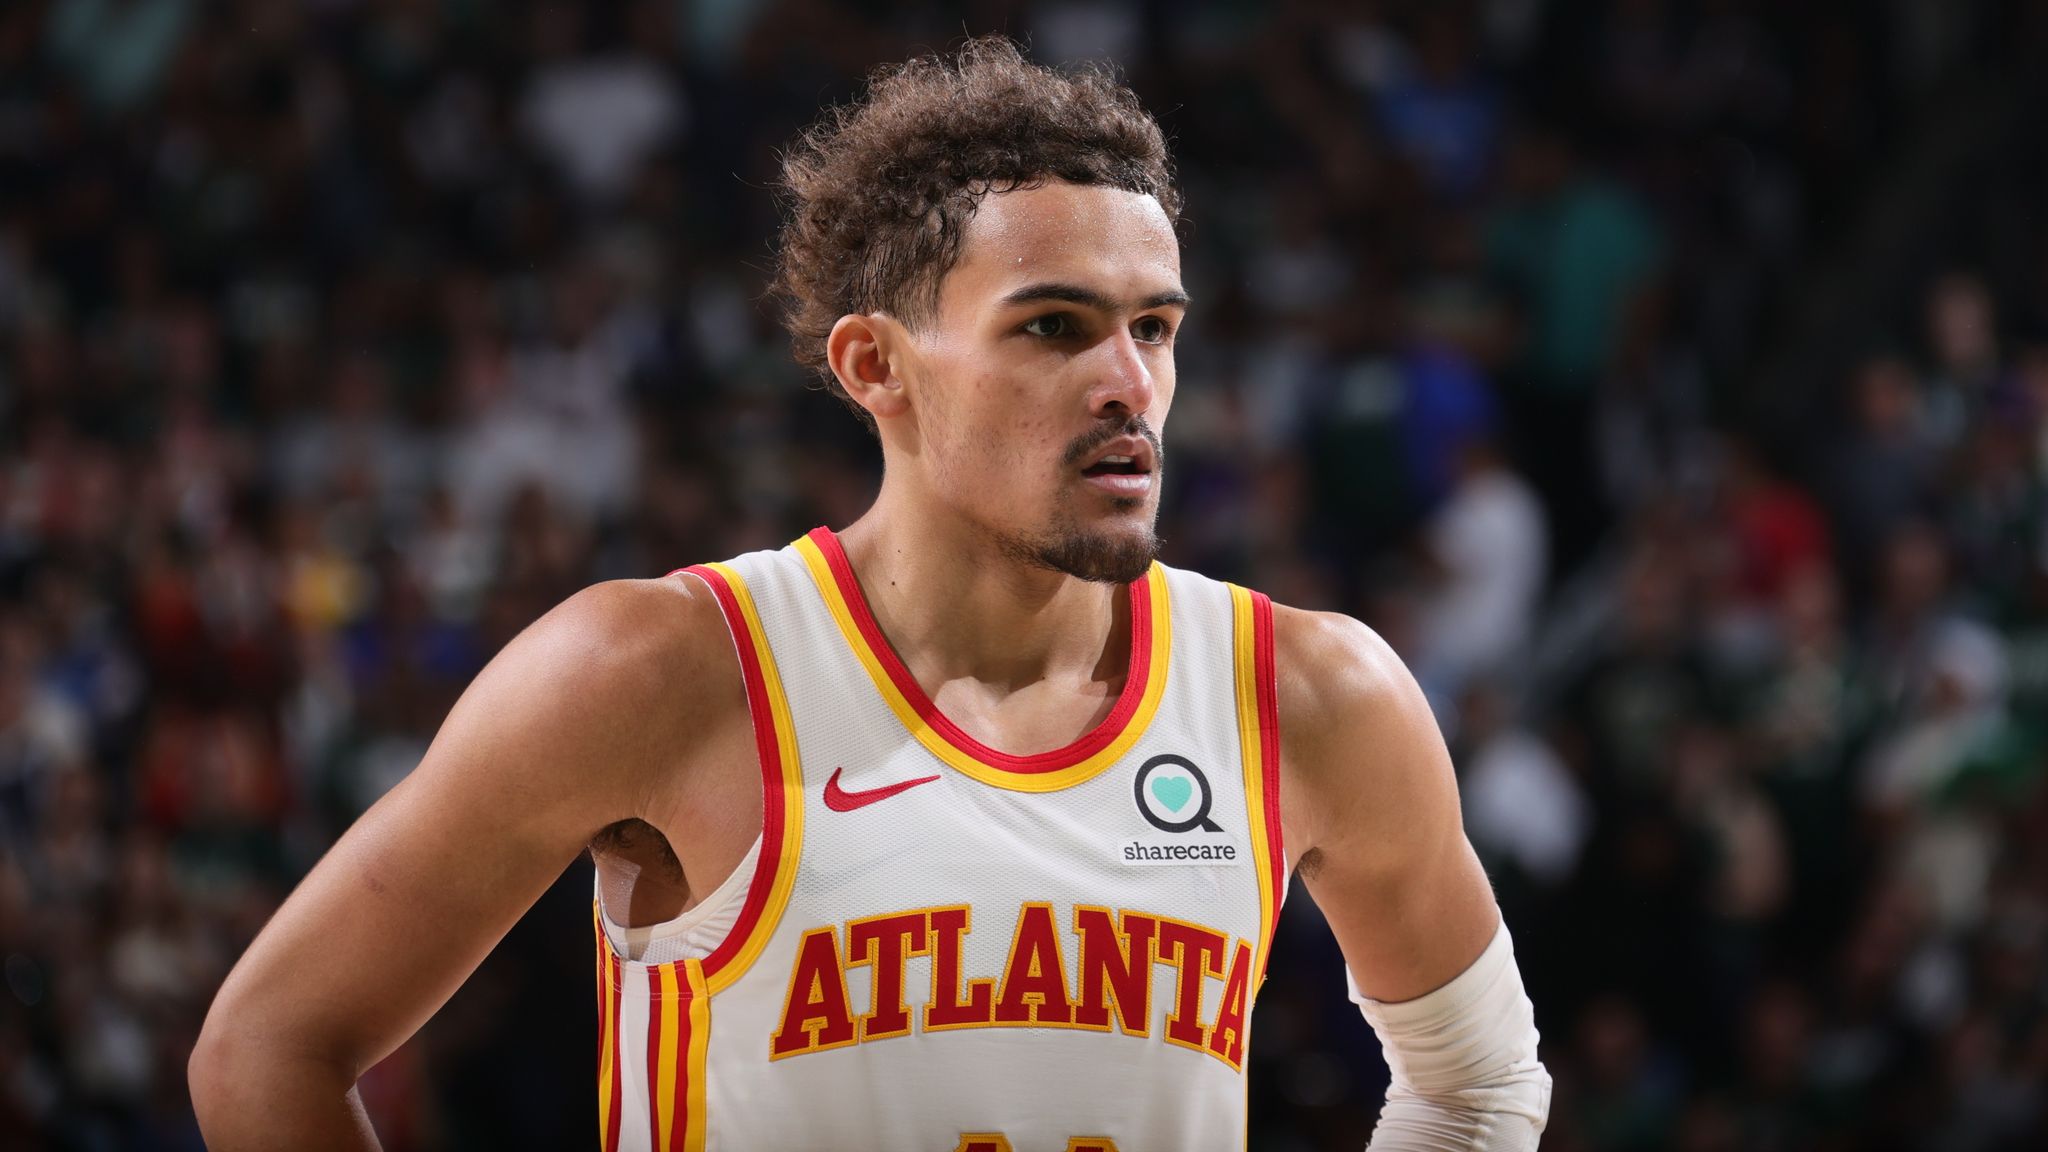 2021 NBA Playoffs - Trae Young and the Atlanta Hawks continue to